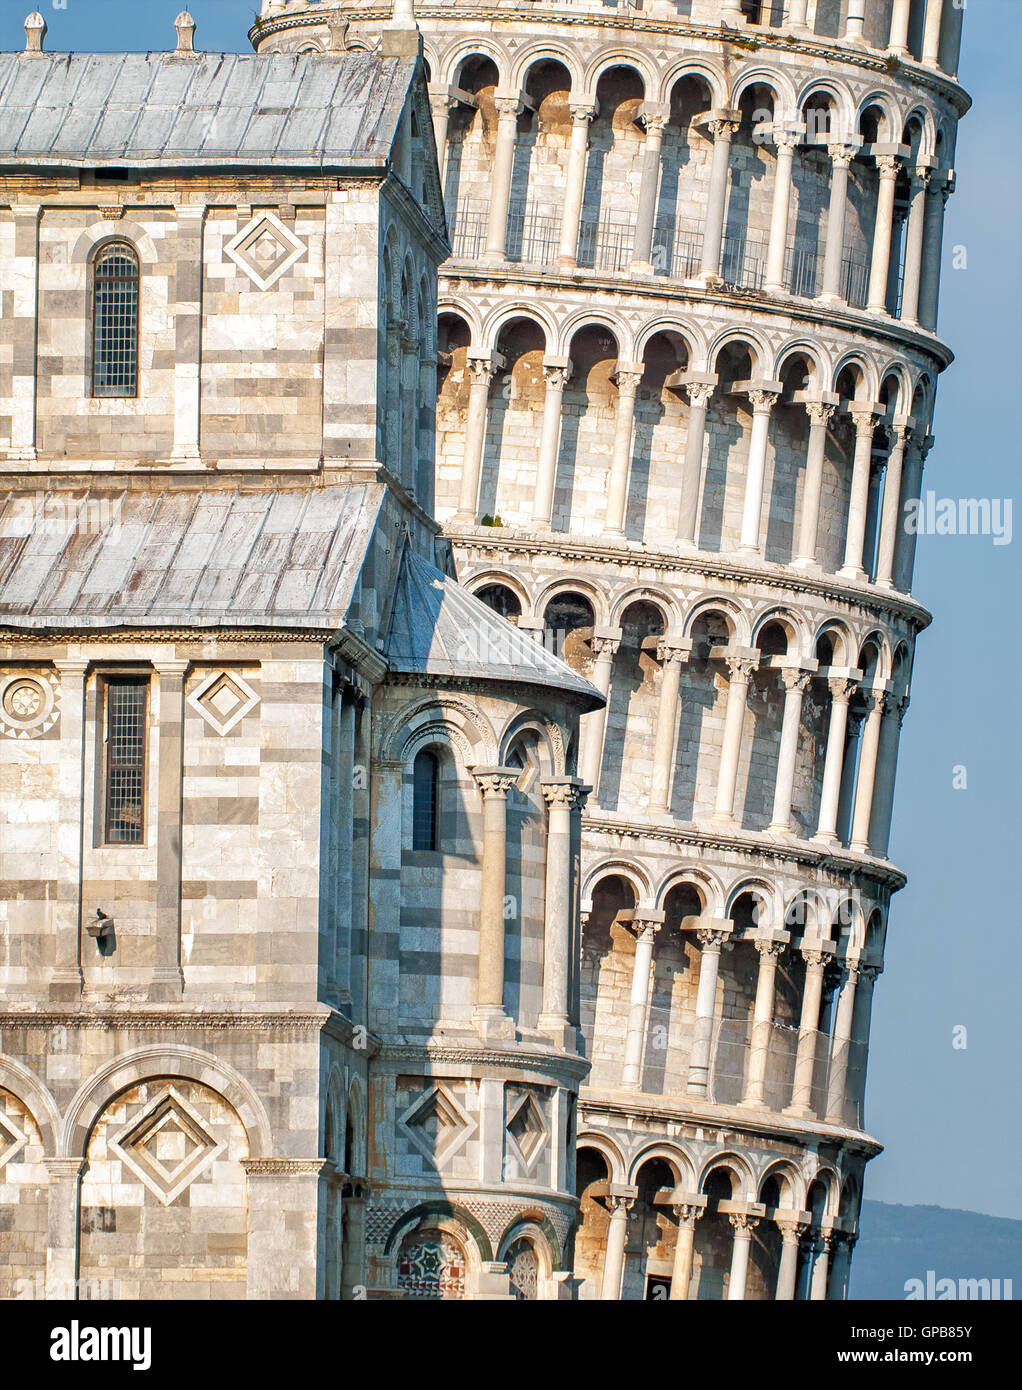 Detail view of the Leaning Tower of Pisa, Italy Stock Photo